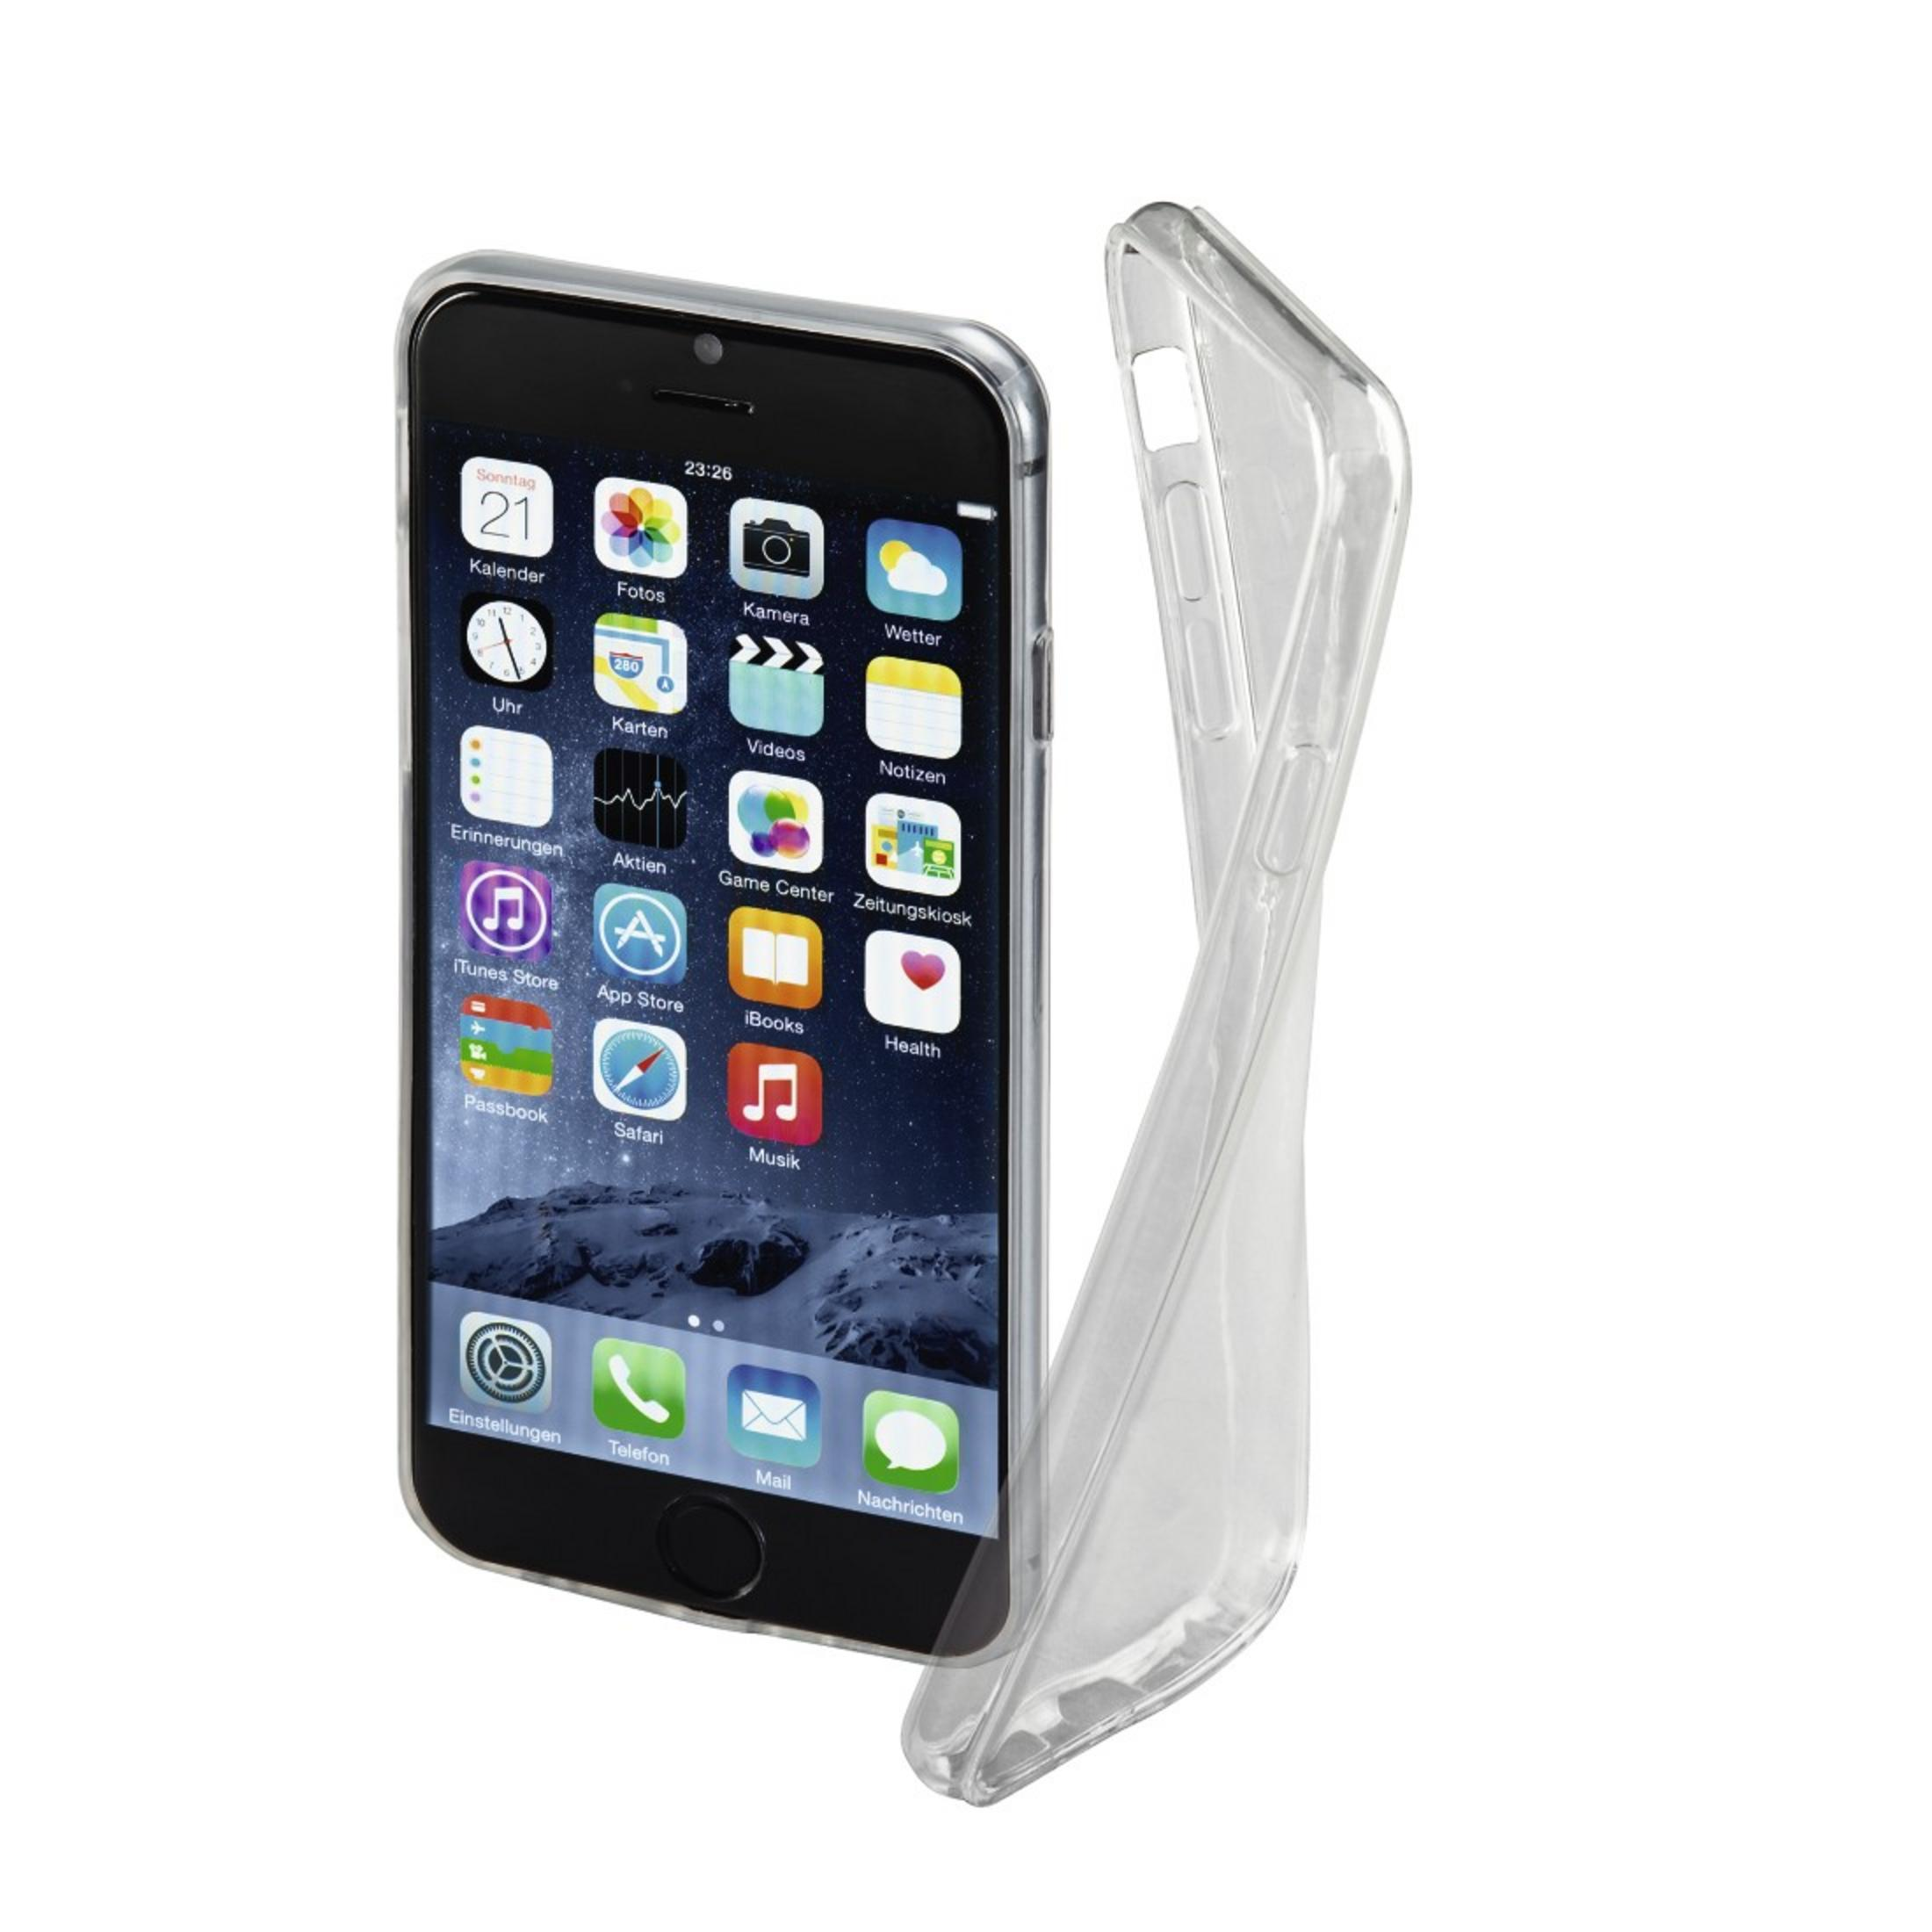 HAMA 177393 CO Backcover, iPhone 6s, Transparent 6, 6/6S,TR,VP2016, CLEAR IPH iPhone Apple